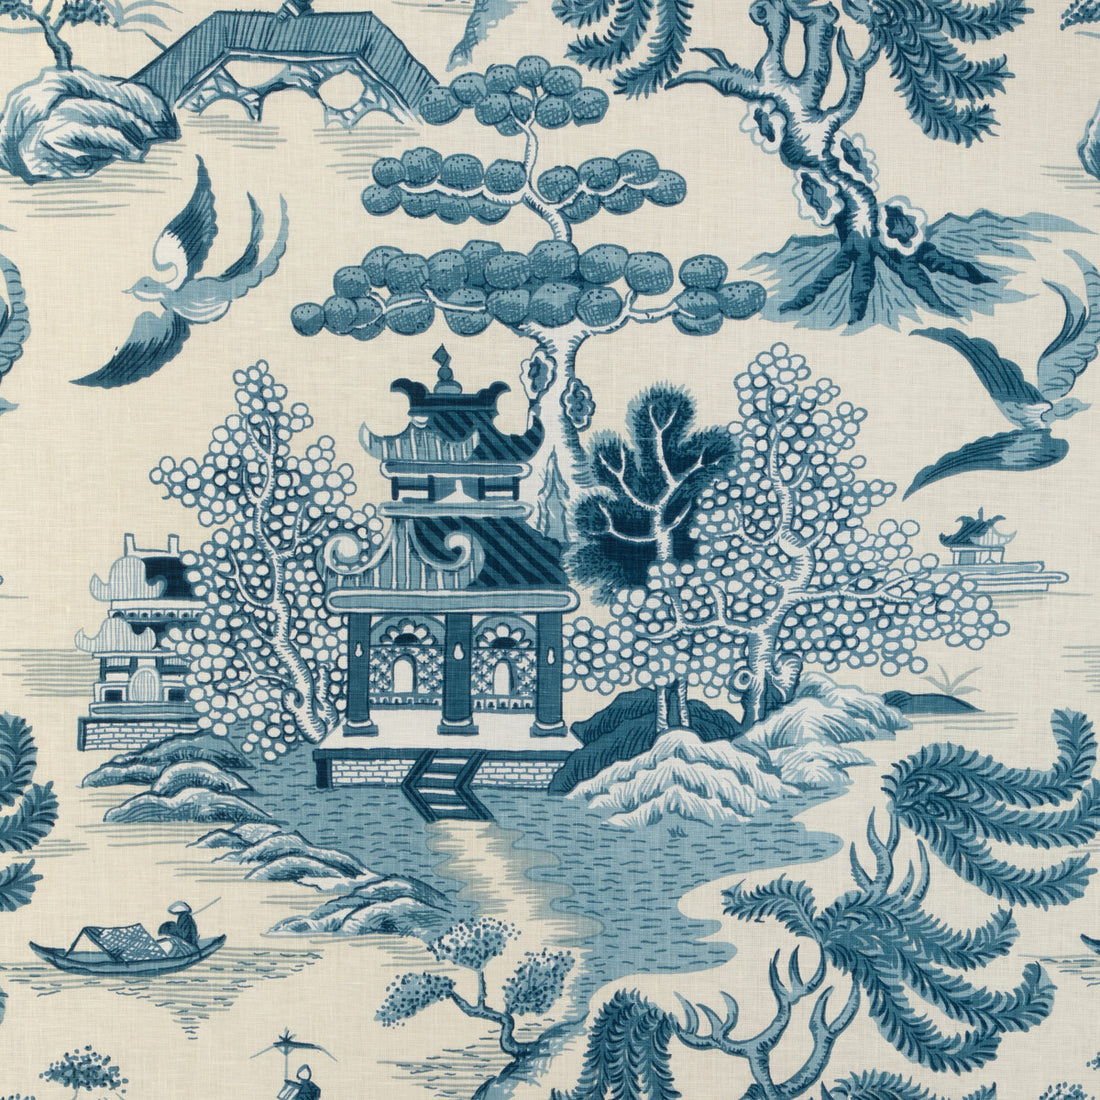 Willow Lake Print fabric in teal color - pattern 2023128.1613.0 - by Lee Jofa in the Lee Jofa 200 collection